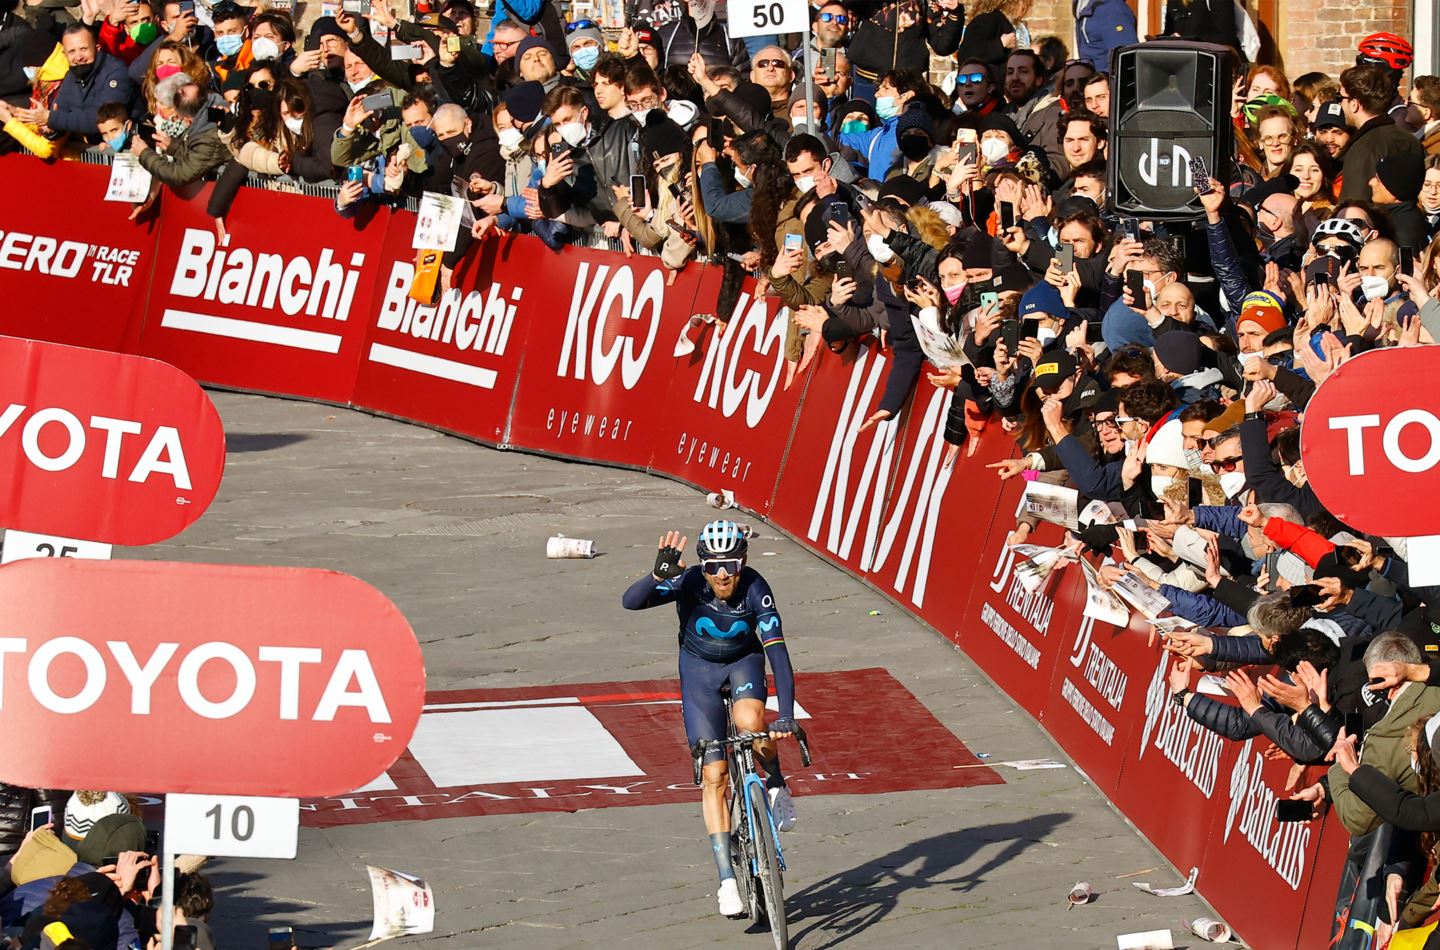 Valverde with a satisfying second place.